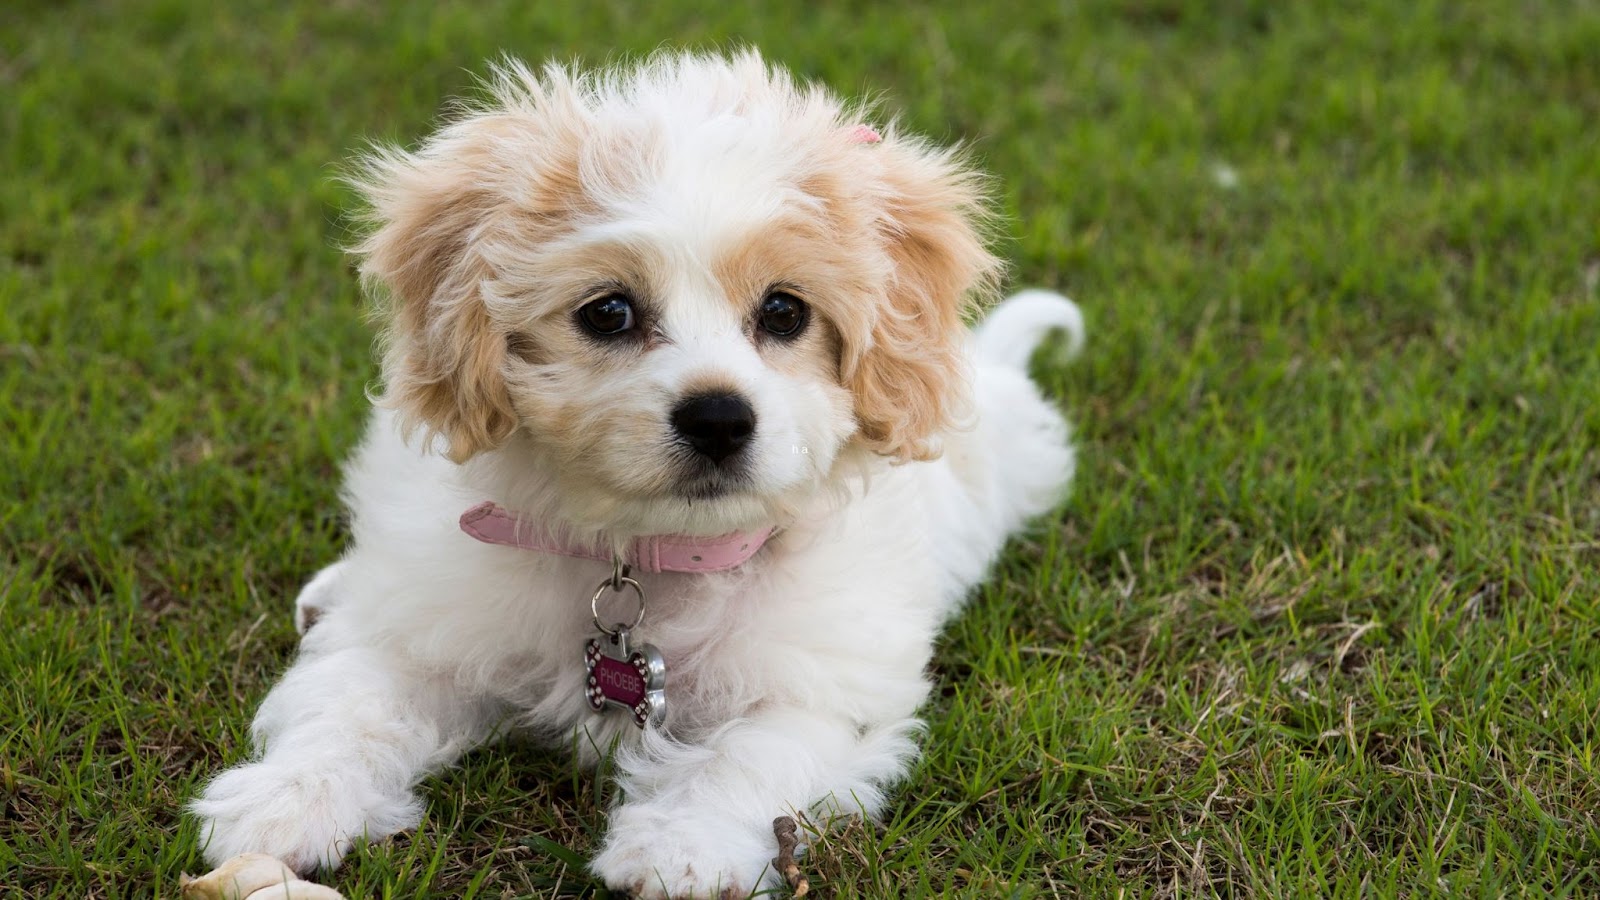 apricot and white cavachon puppy lying on grass